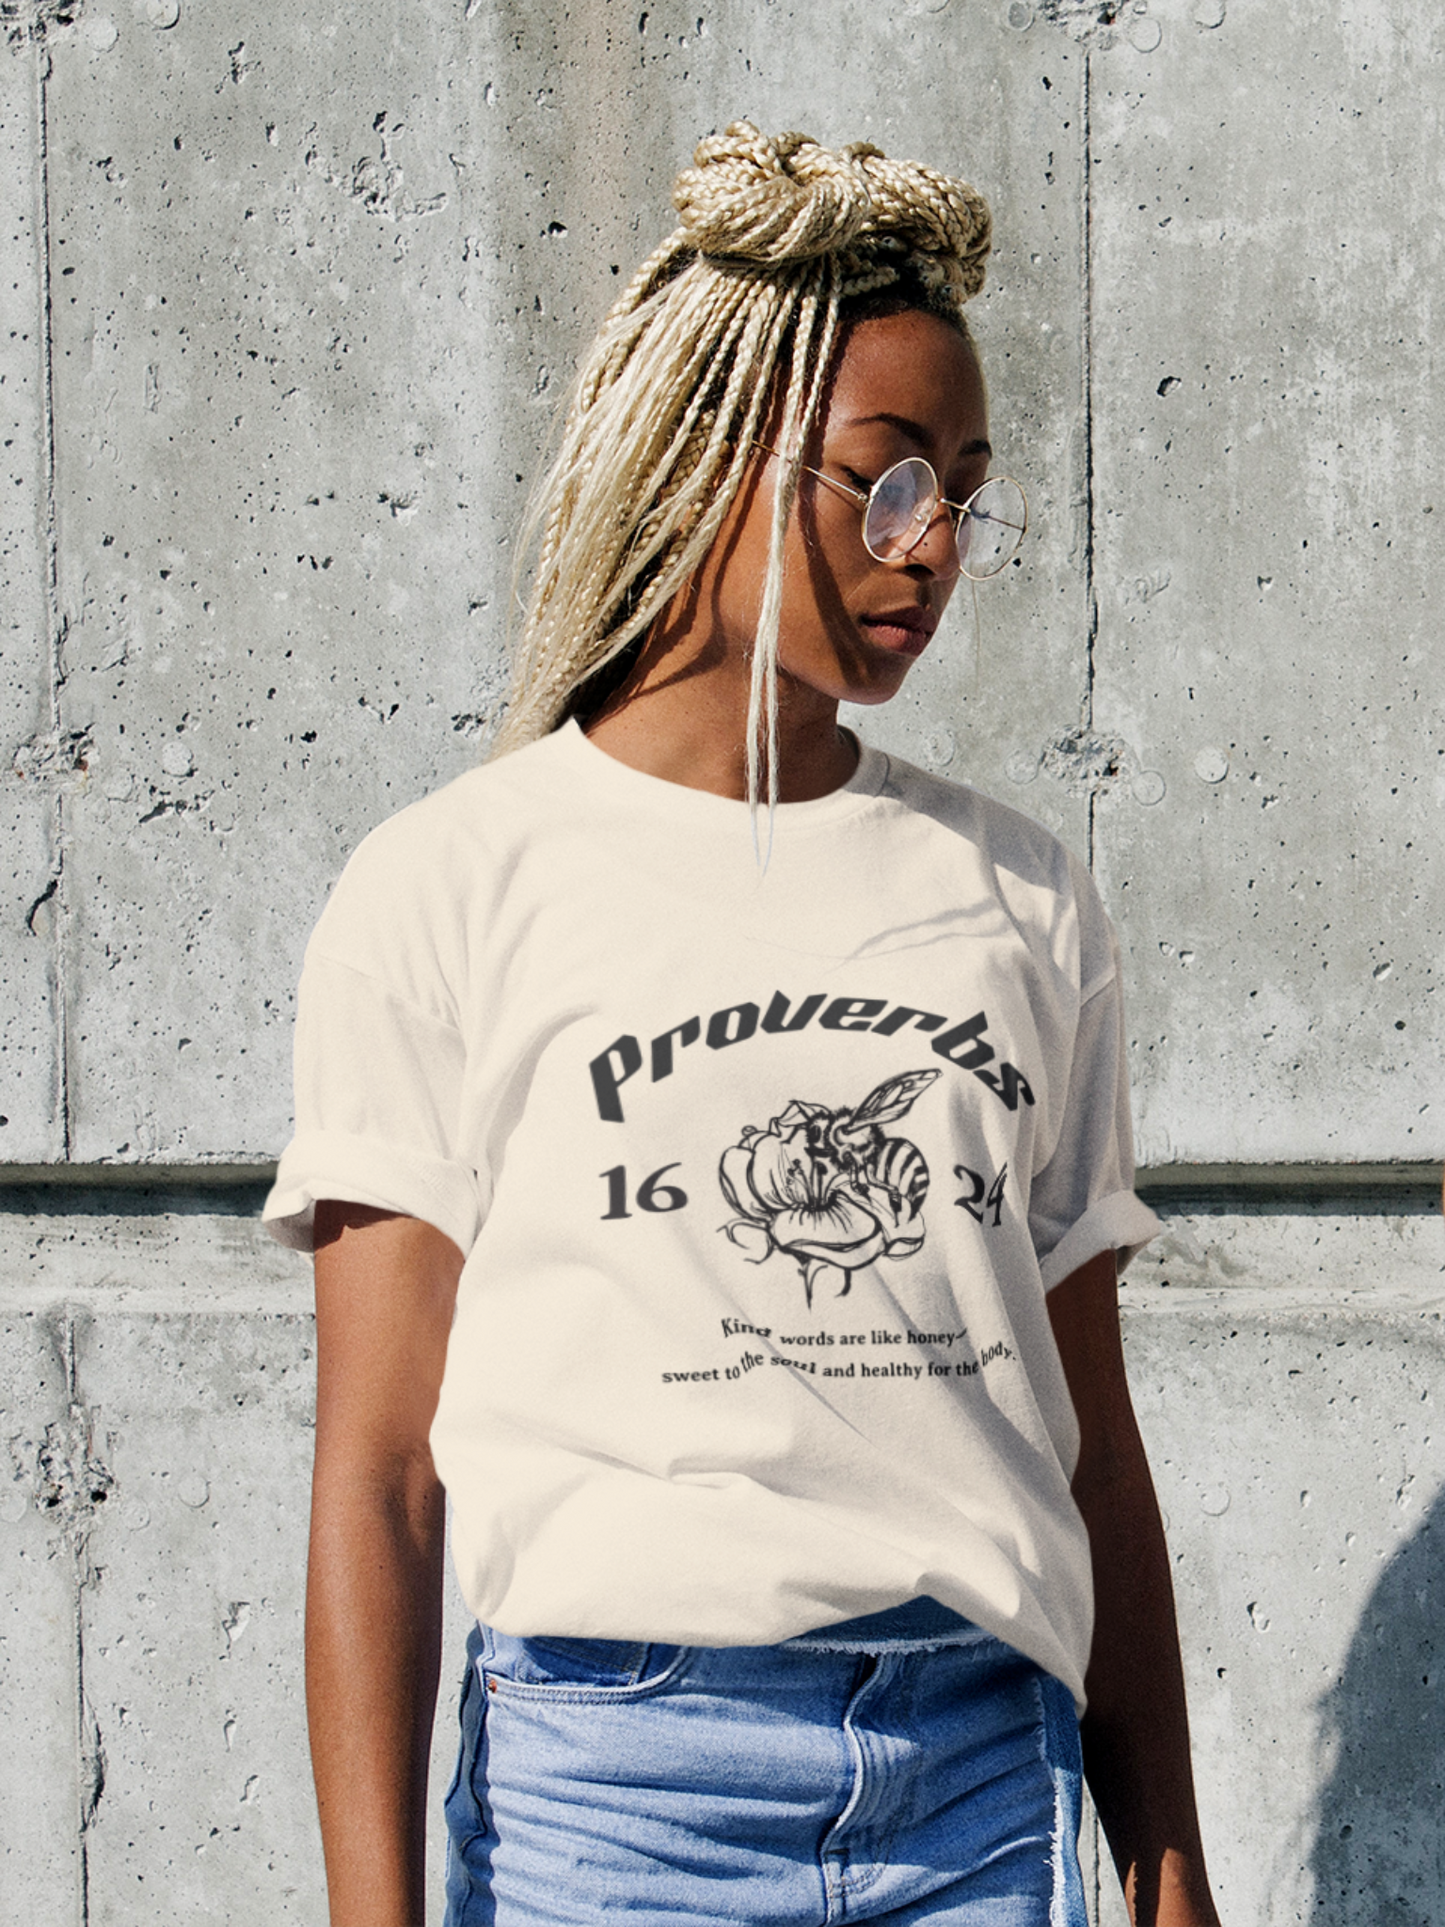 Proverbs 16:24 Graphic Tee